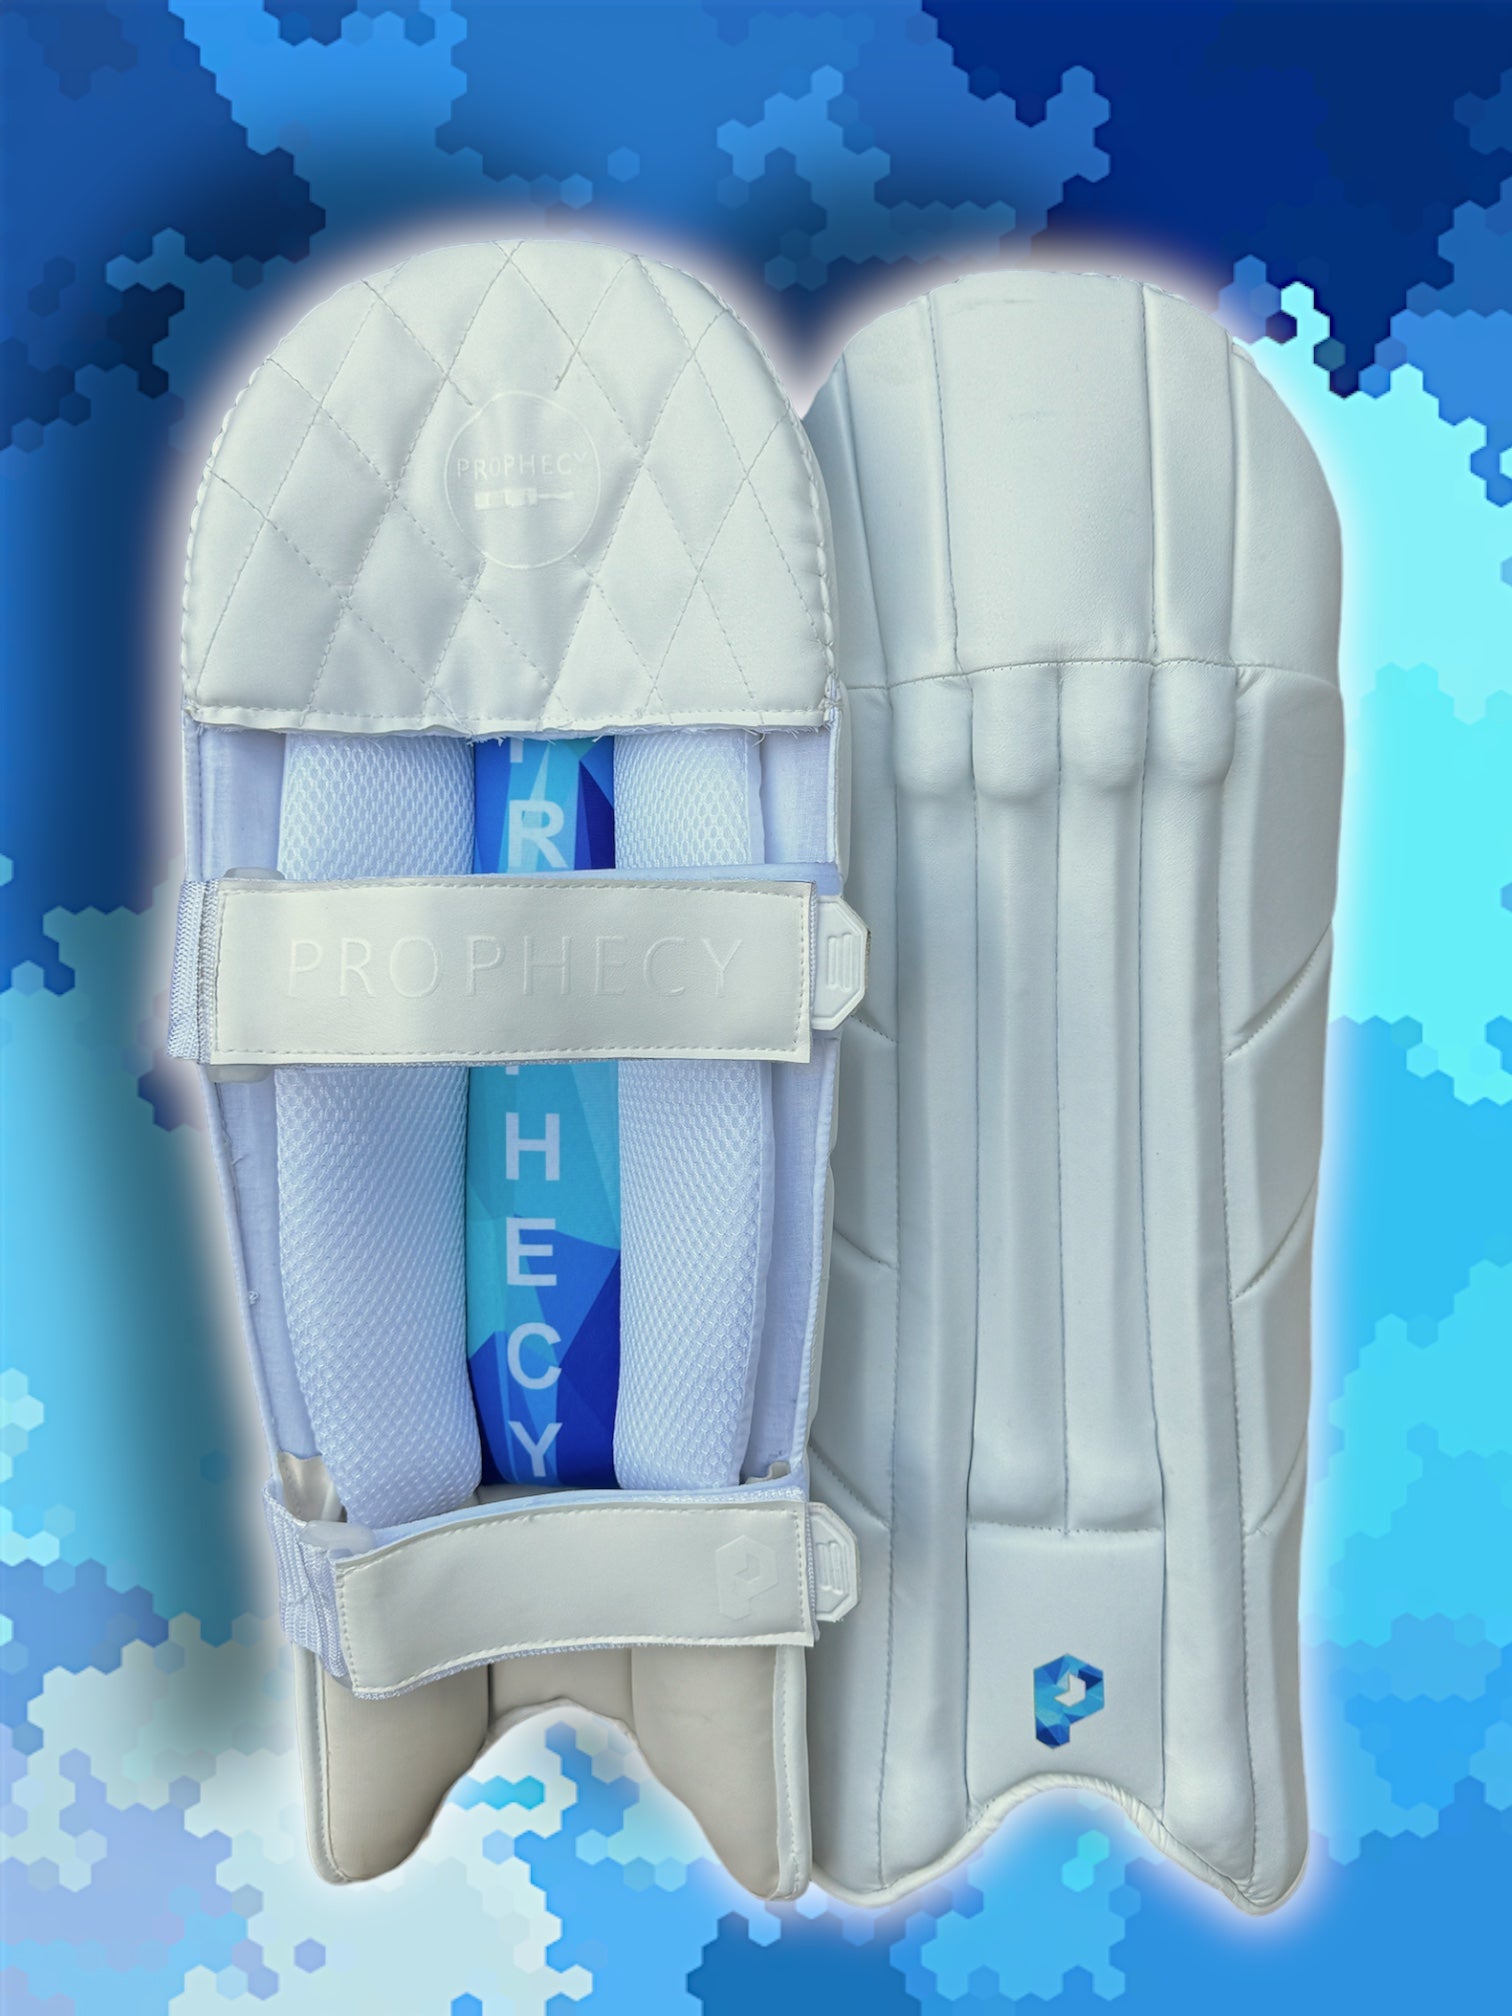 Prophecy wicket keeping pads